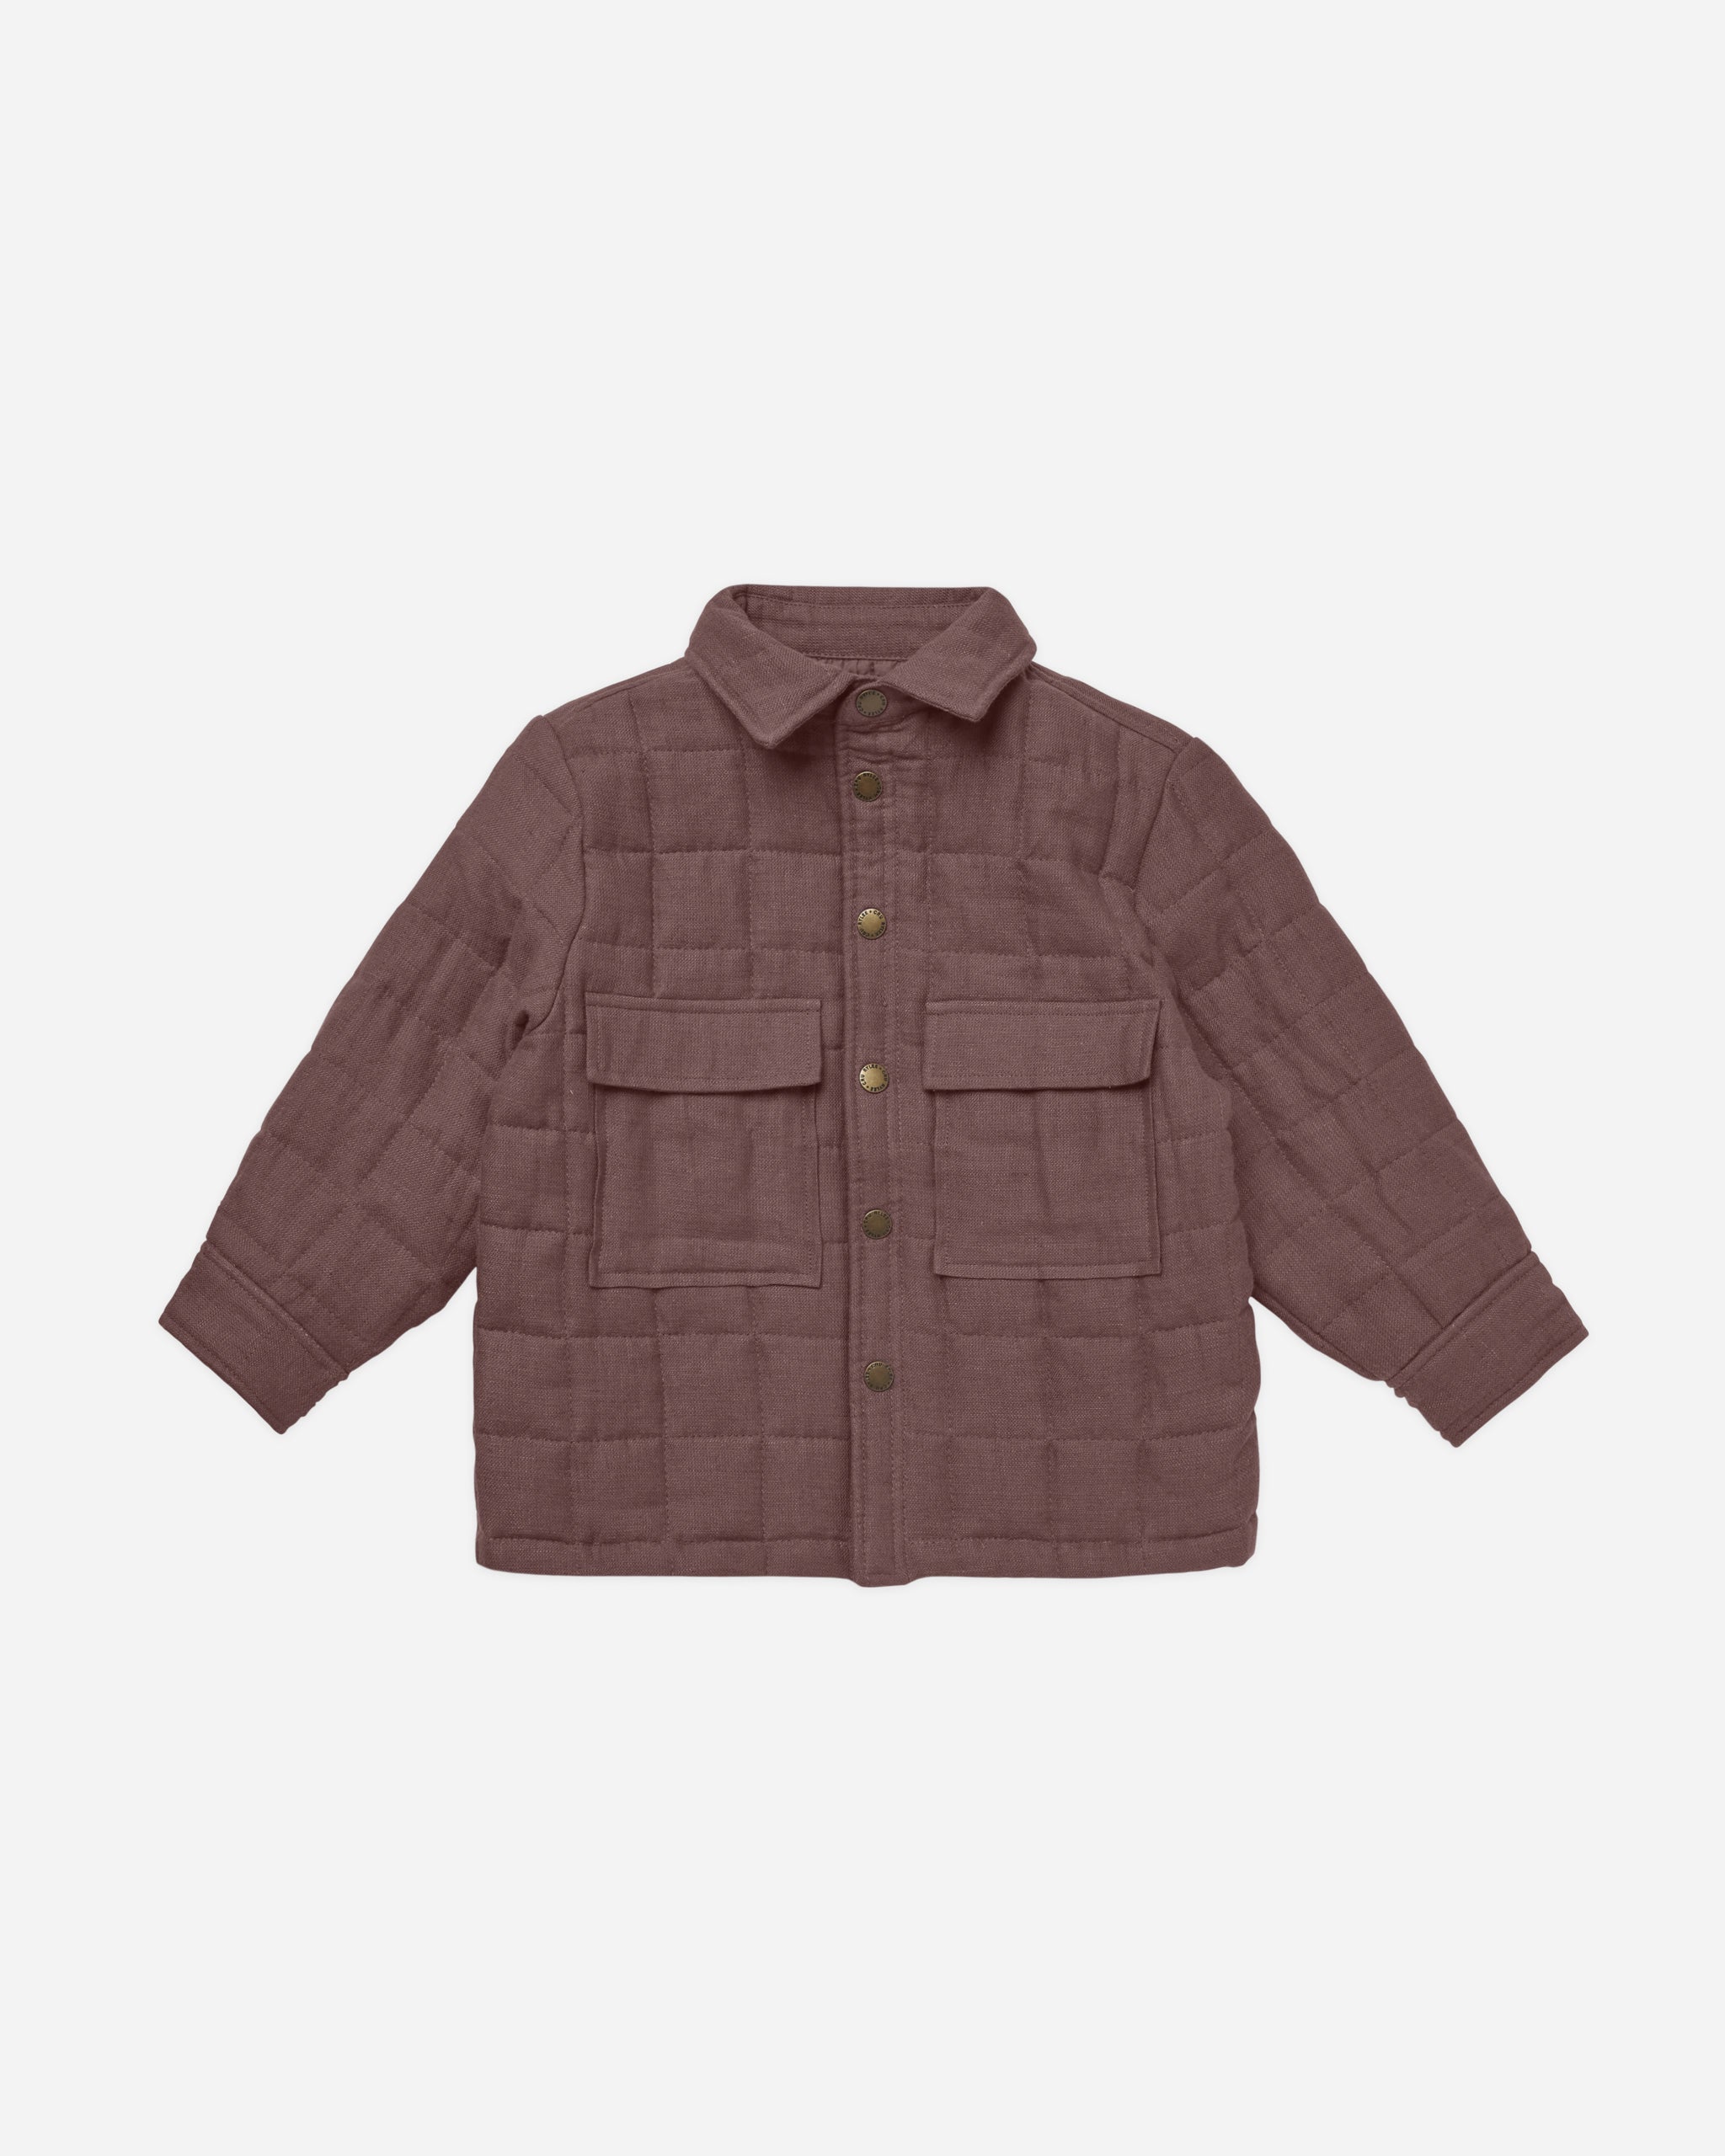 Padded Overshirt || Plum - Rylee + Cru | Kids Clothes | Trendy Baby Clothes | Modern Infant Outfits |